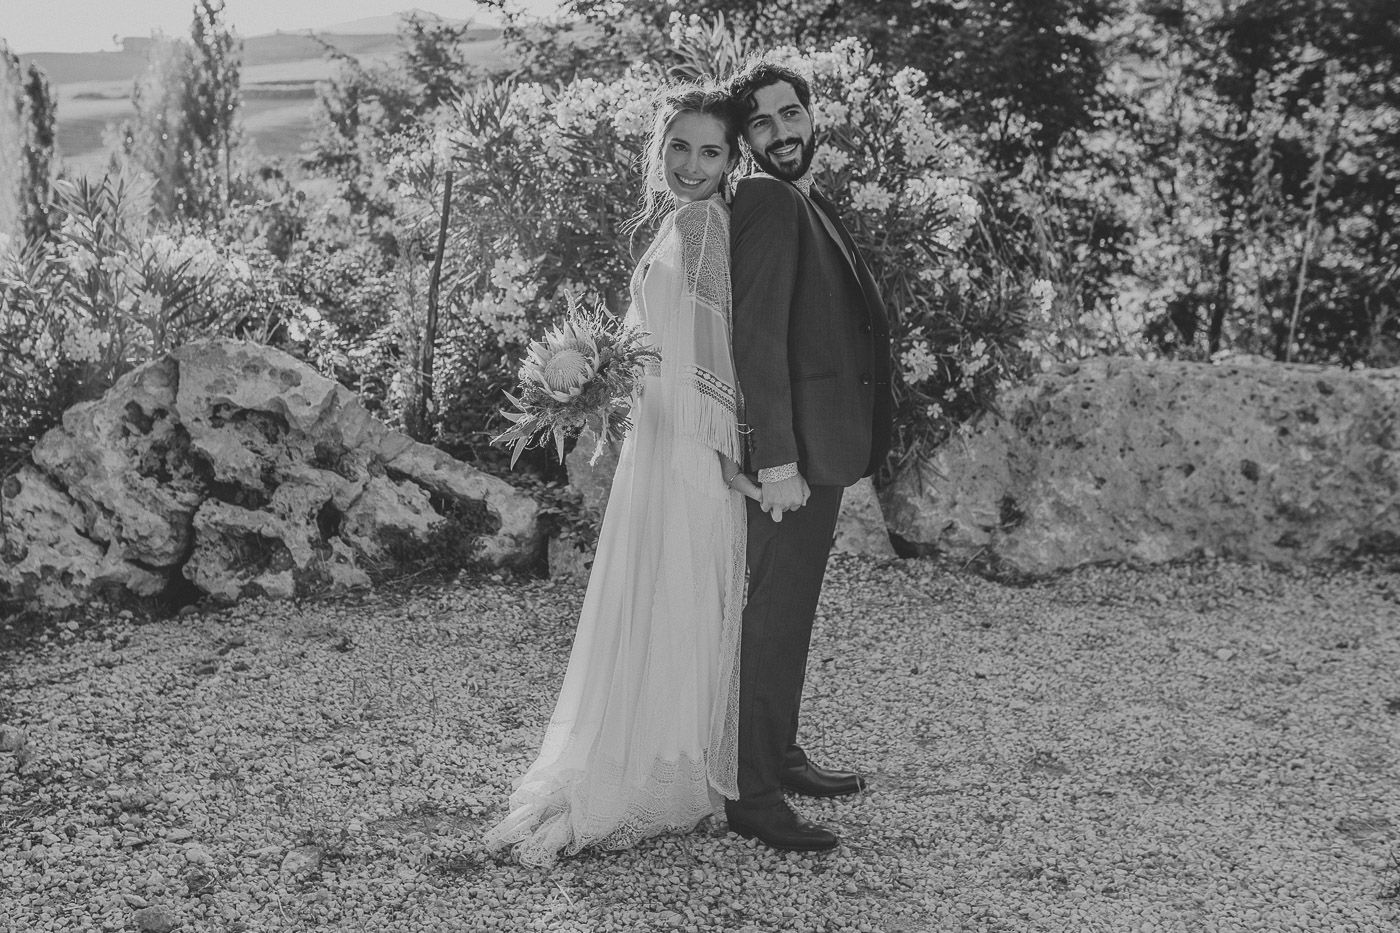 Capturing Love: The Sicilian Wedding Photography Experienc